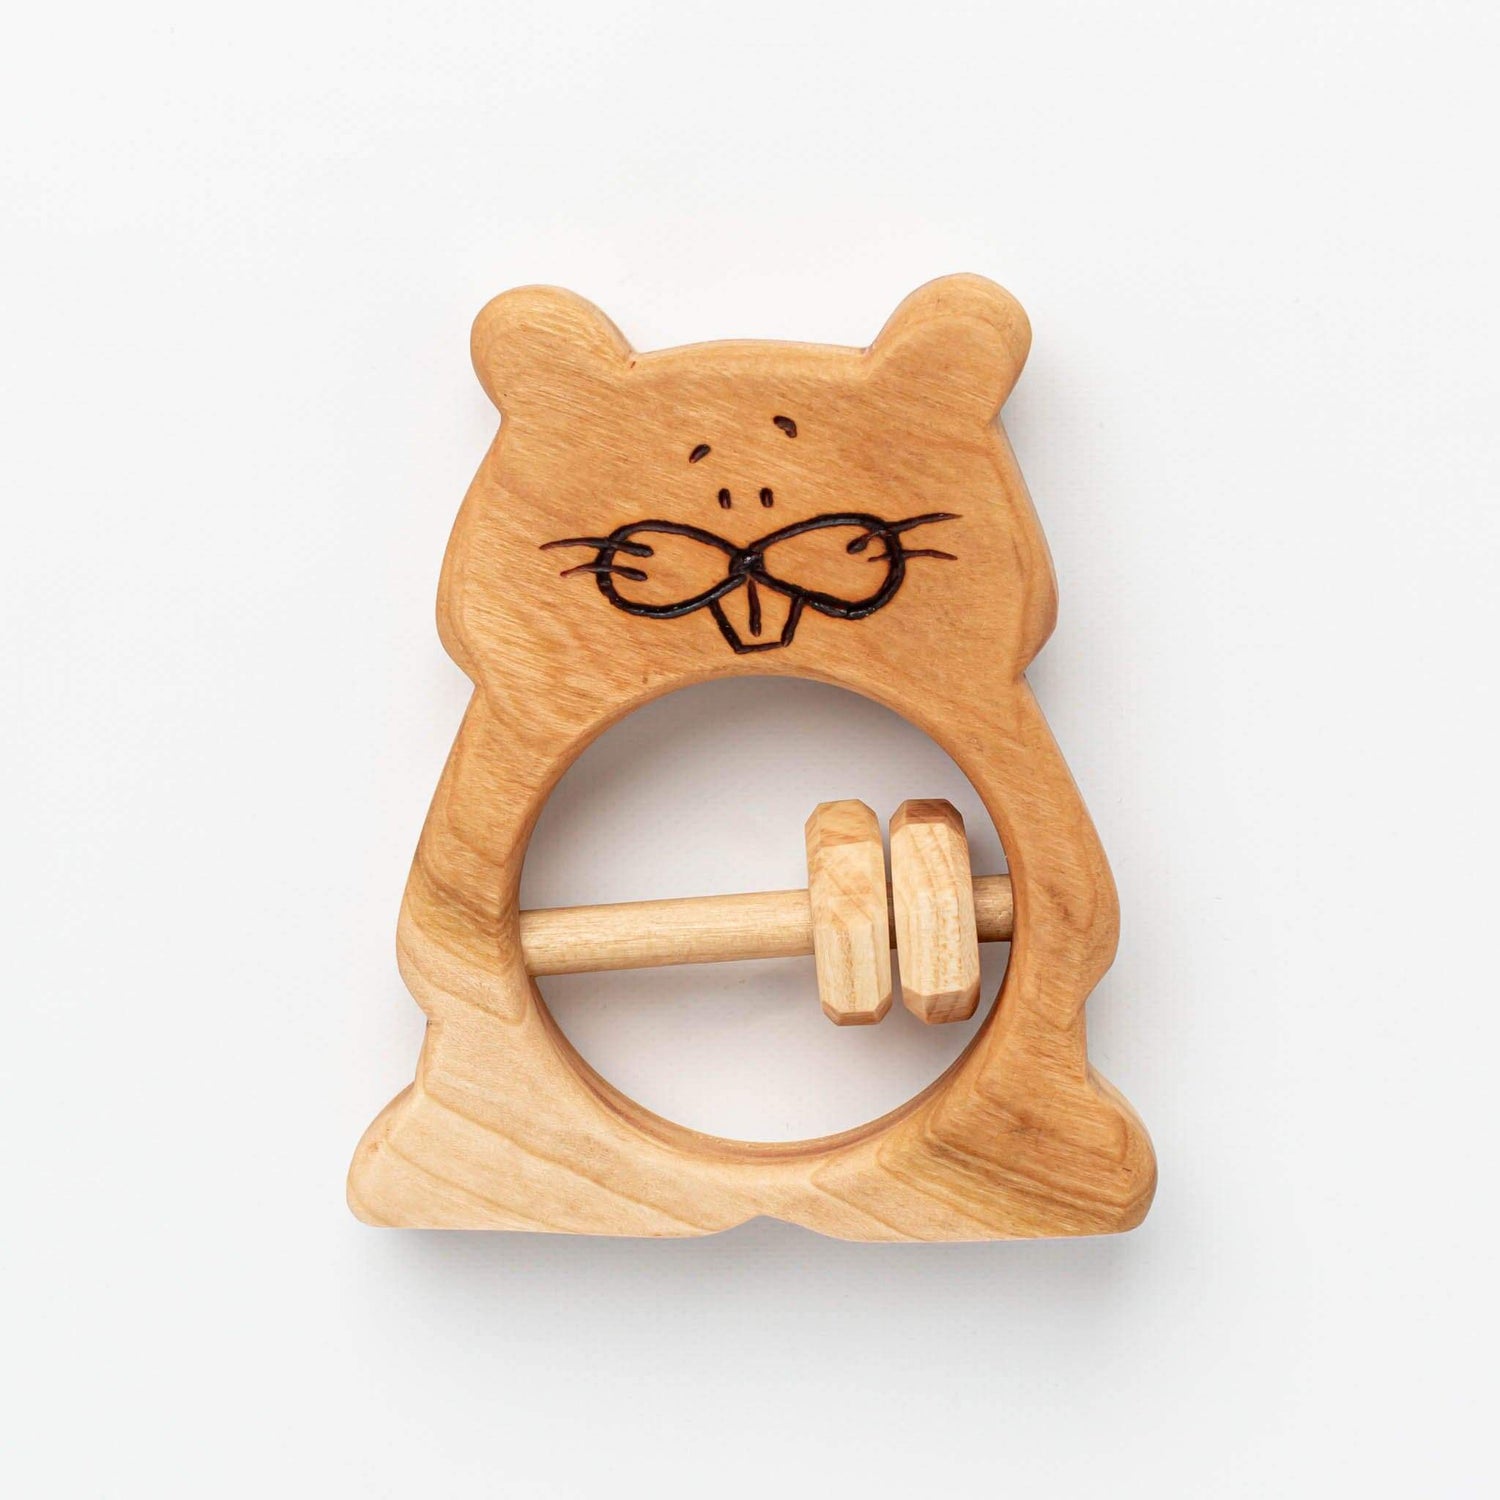 The Wooden Kind Teether Handmade Beaver Rattle & Teething Toy